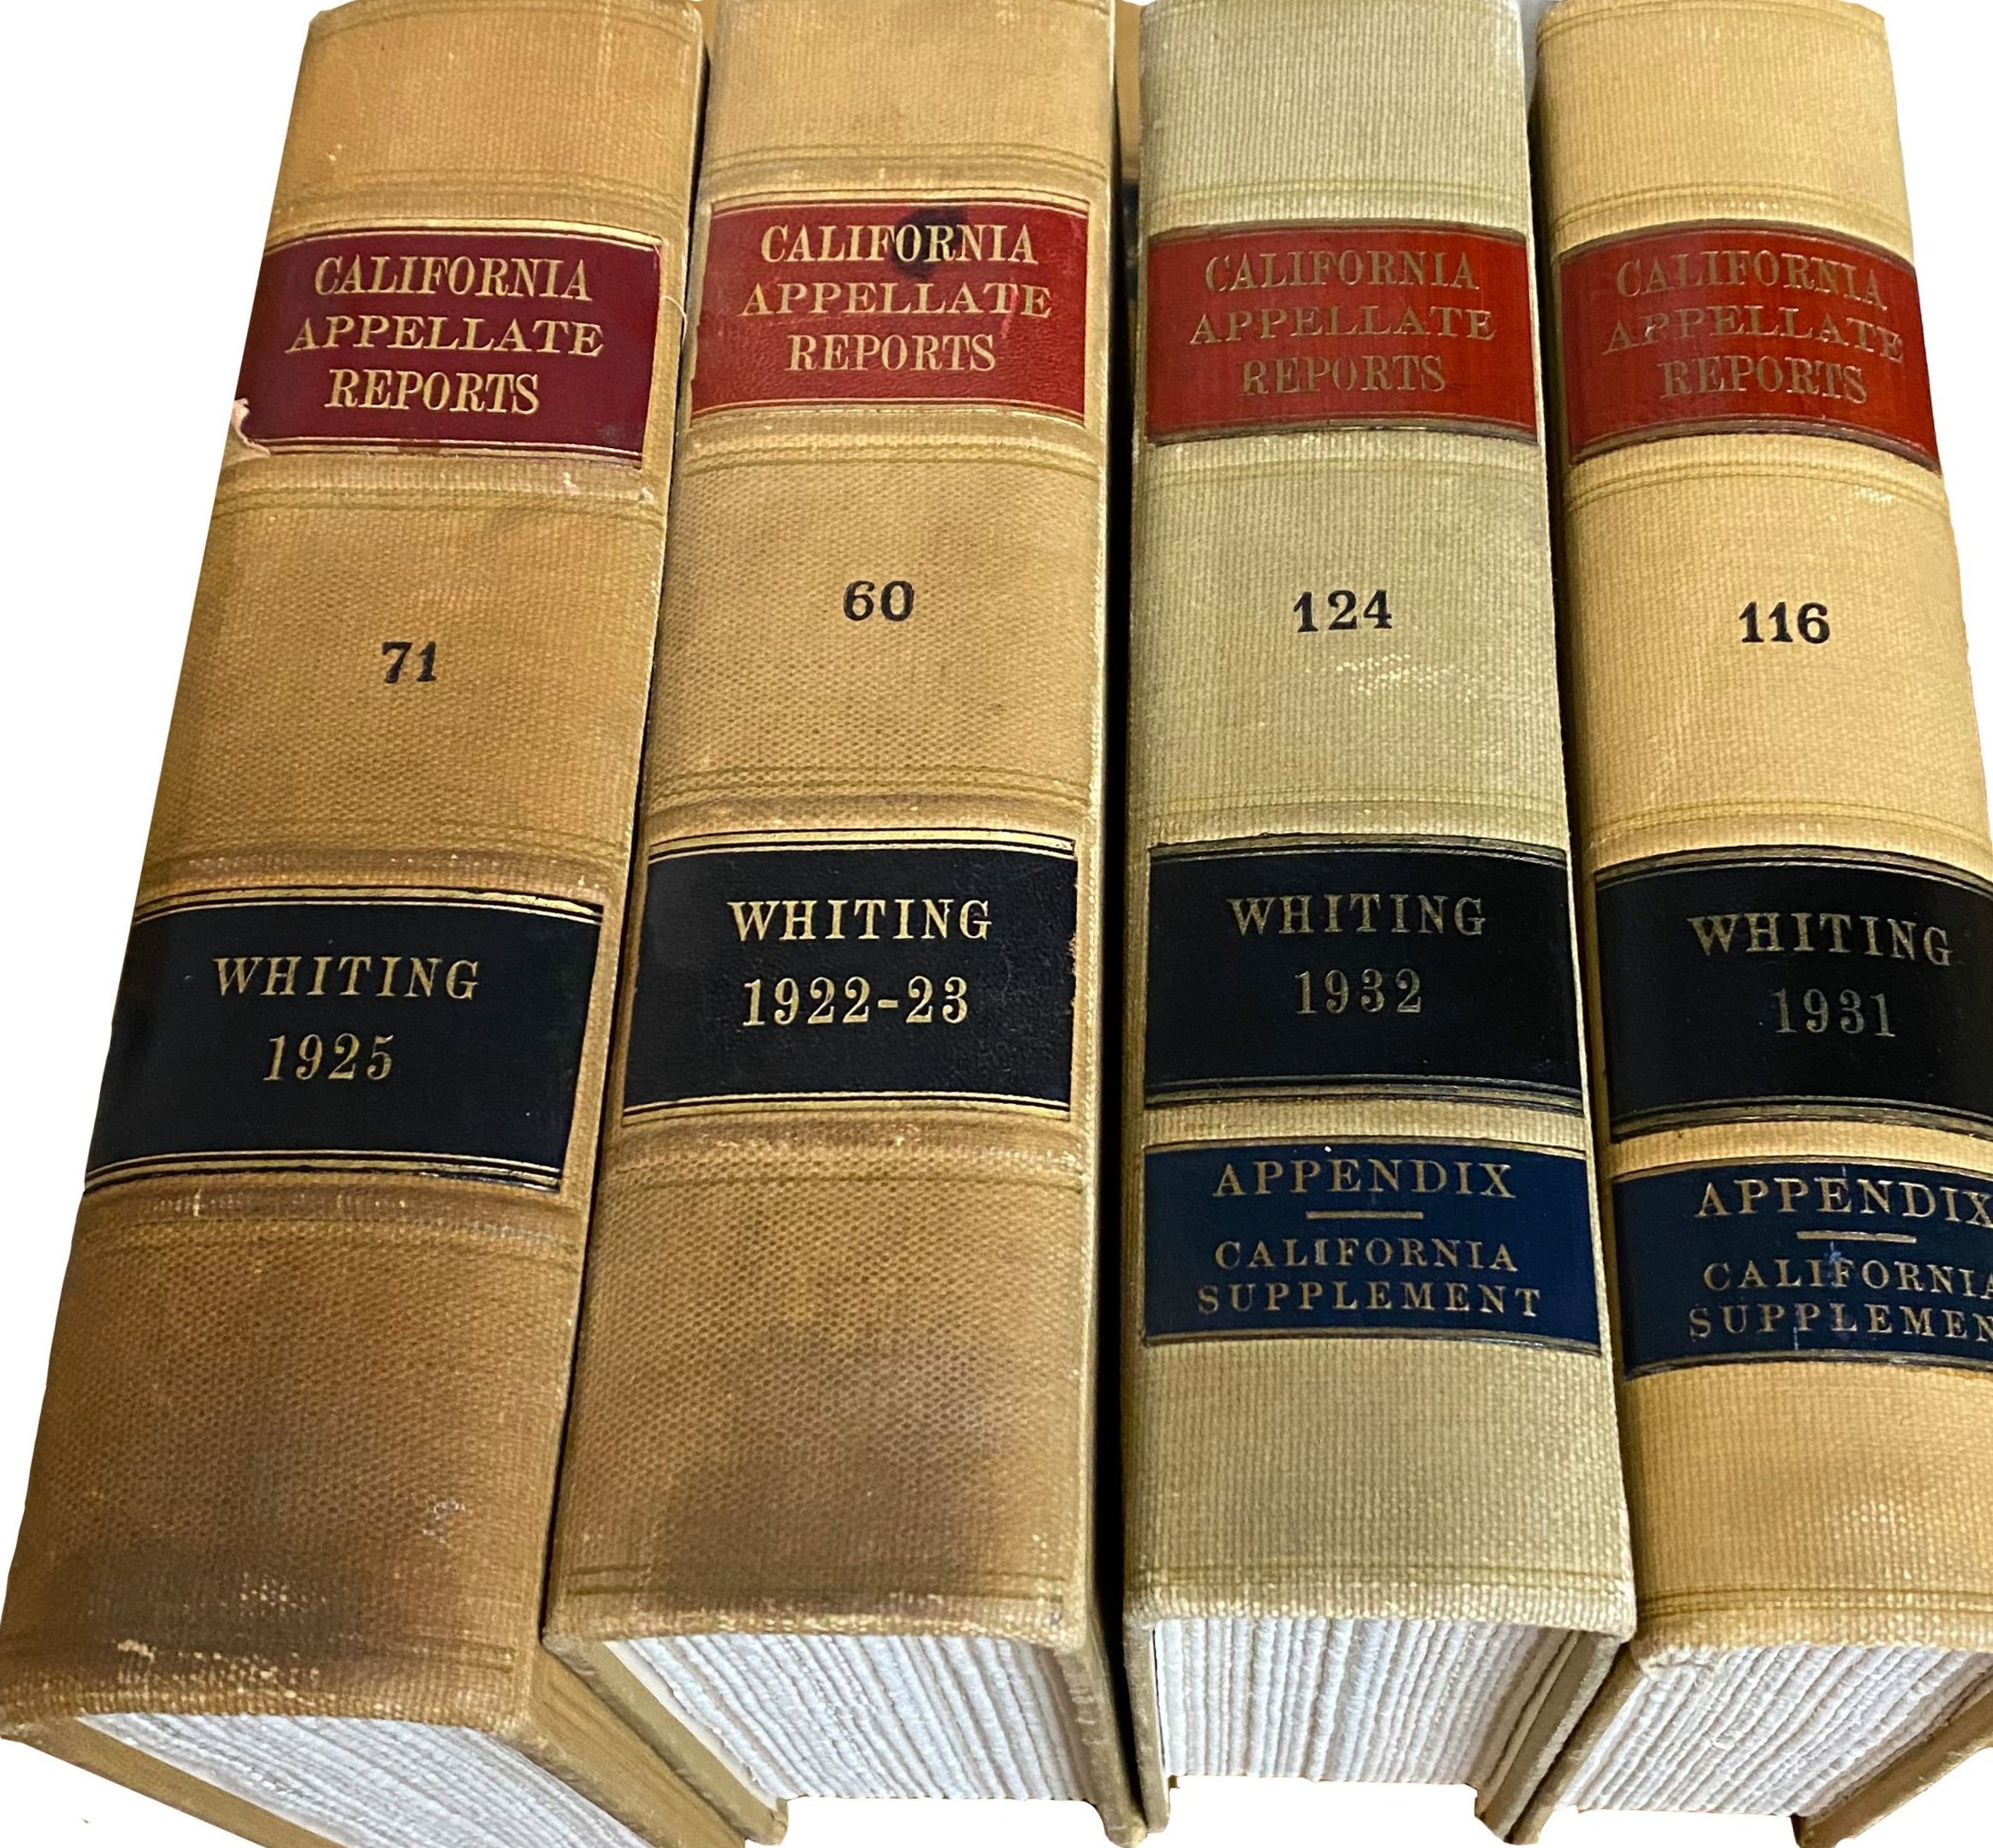 California Appellate Reports (Early 1900's)